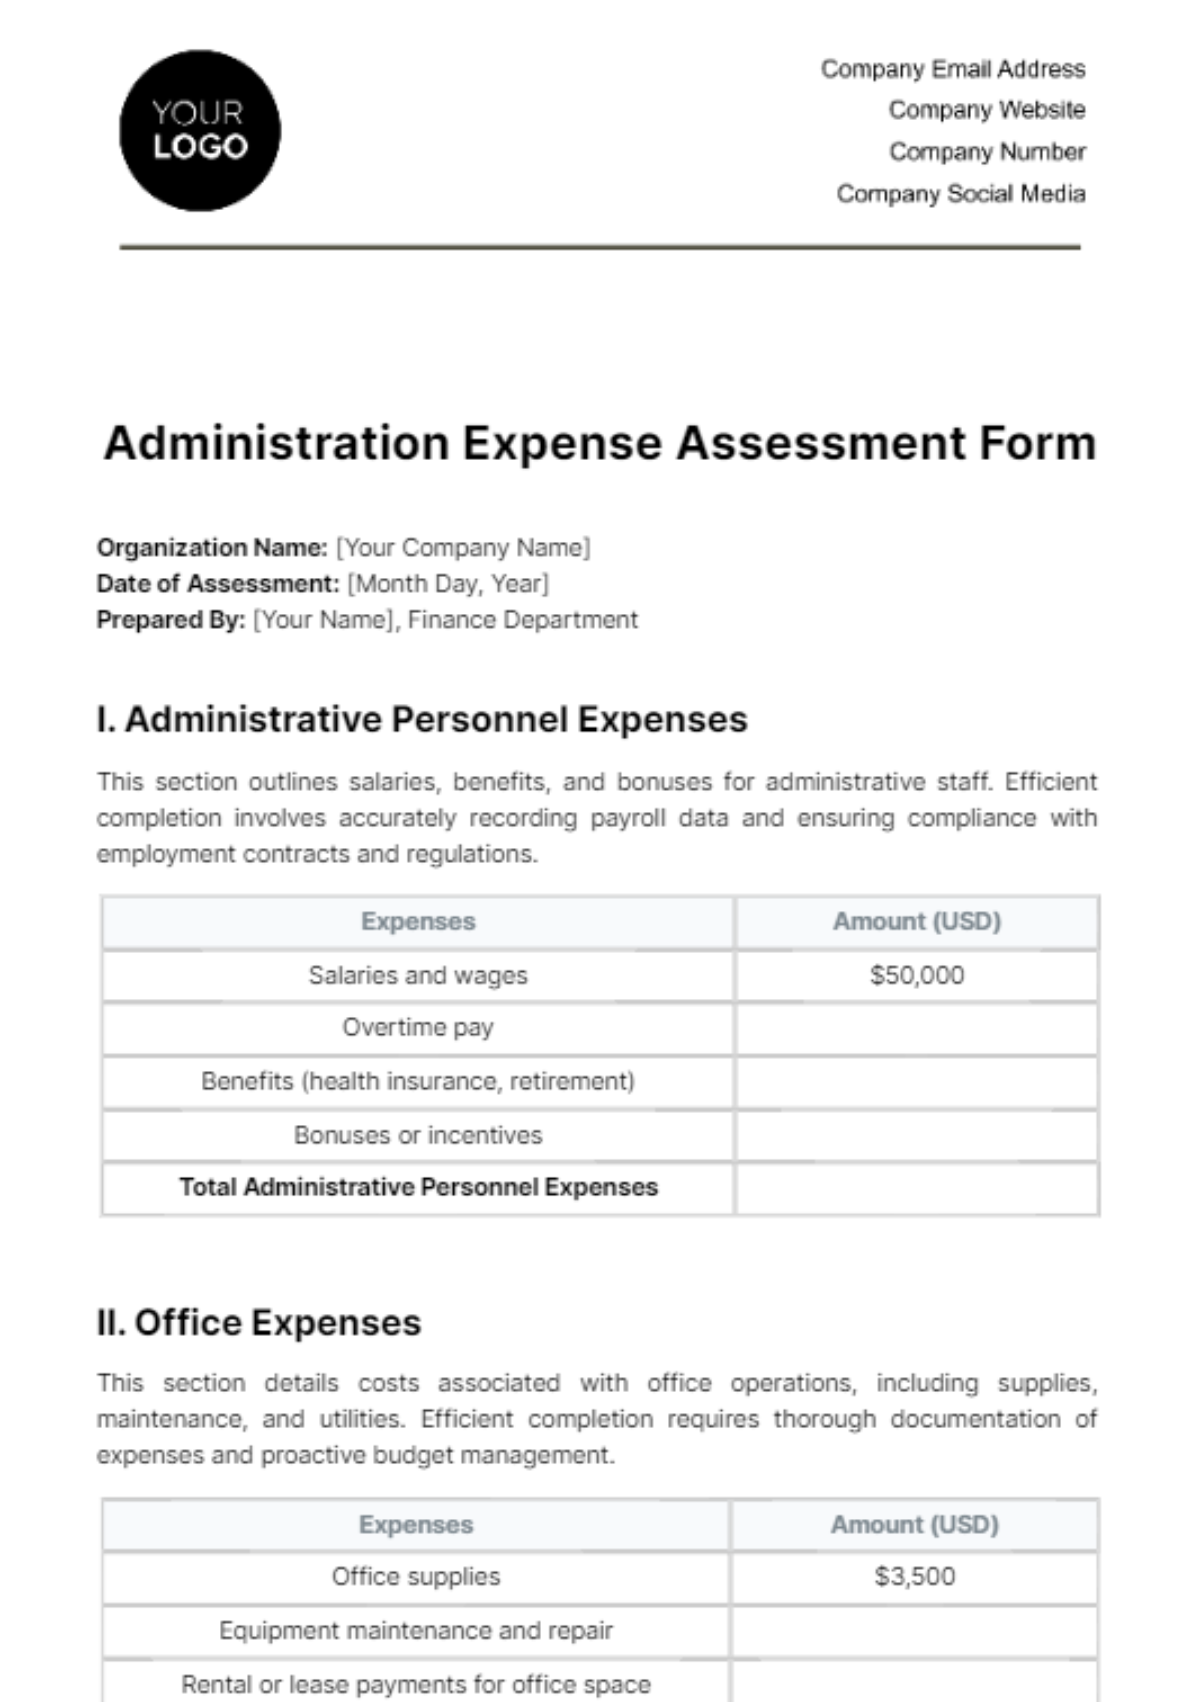 Administration Expense Assessment Form Template